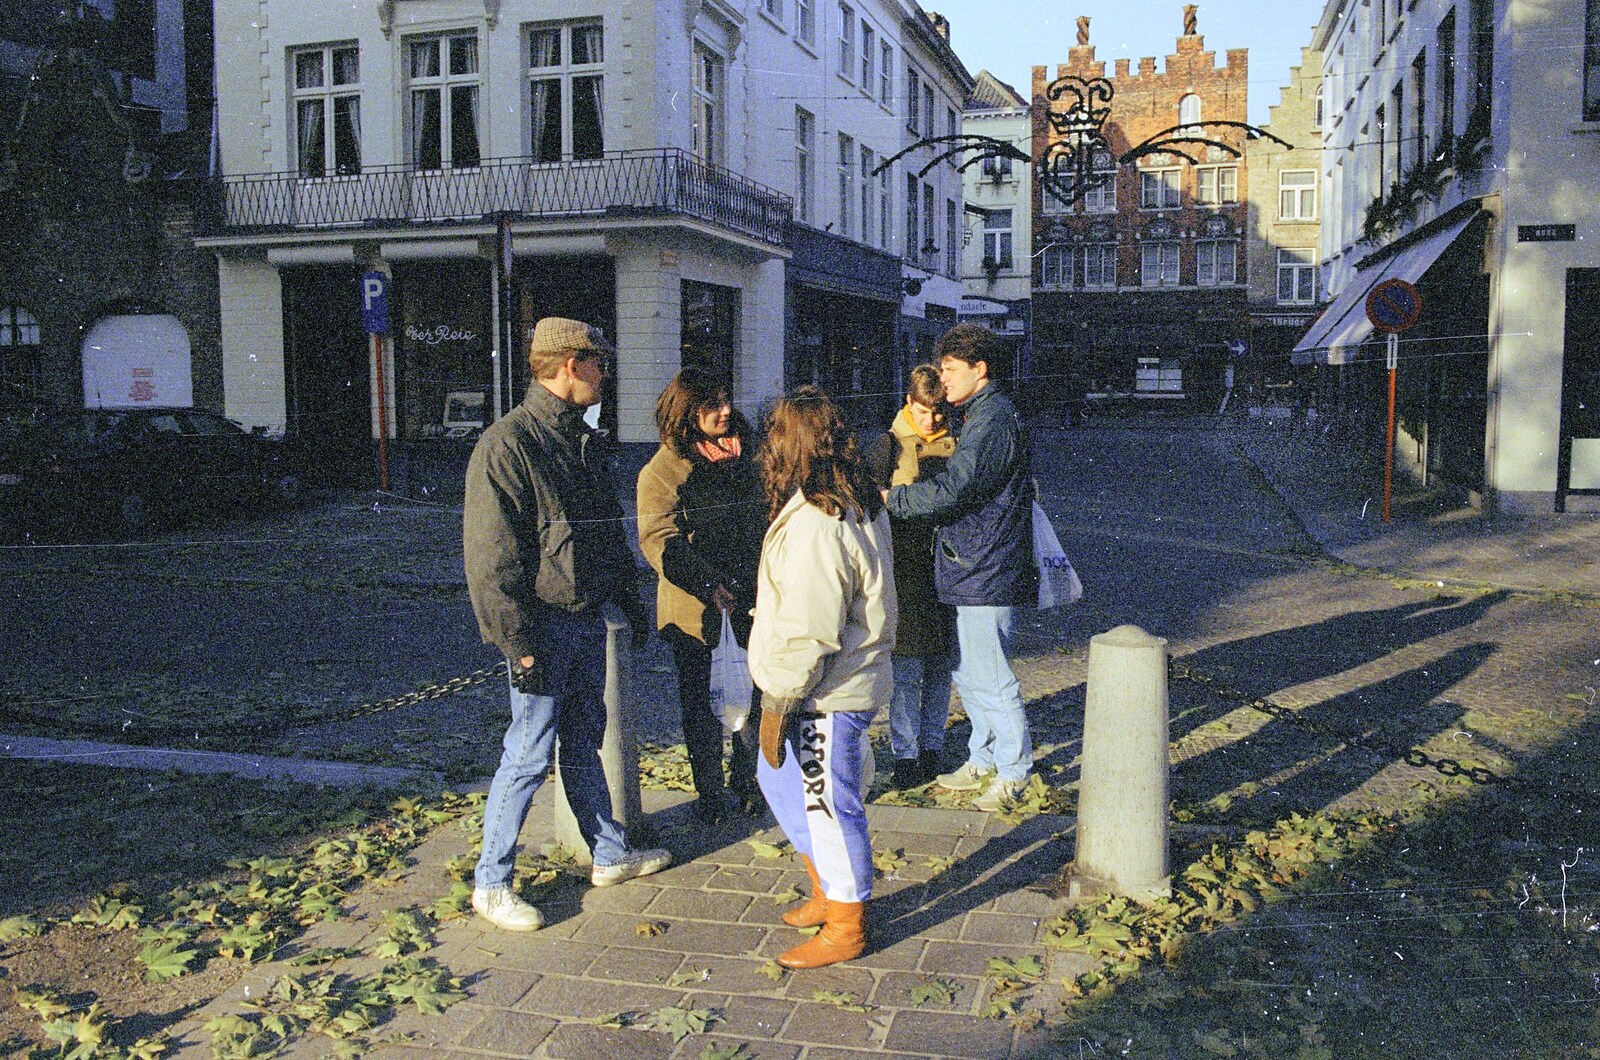 Waiting around from Clays Does Bruges, Belgium - 19th December 1992